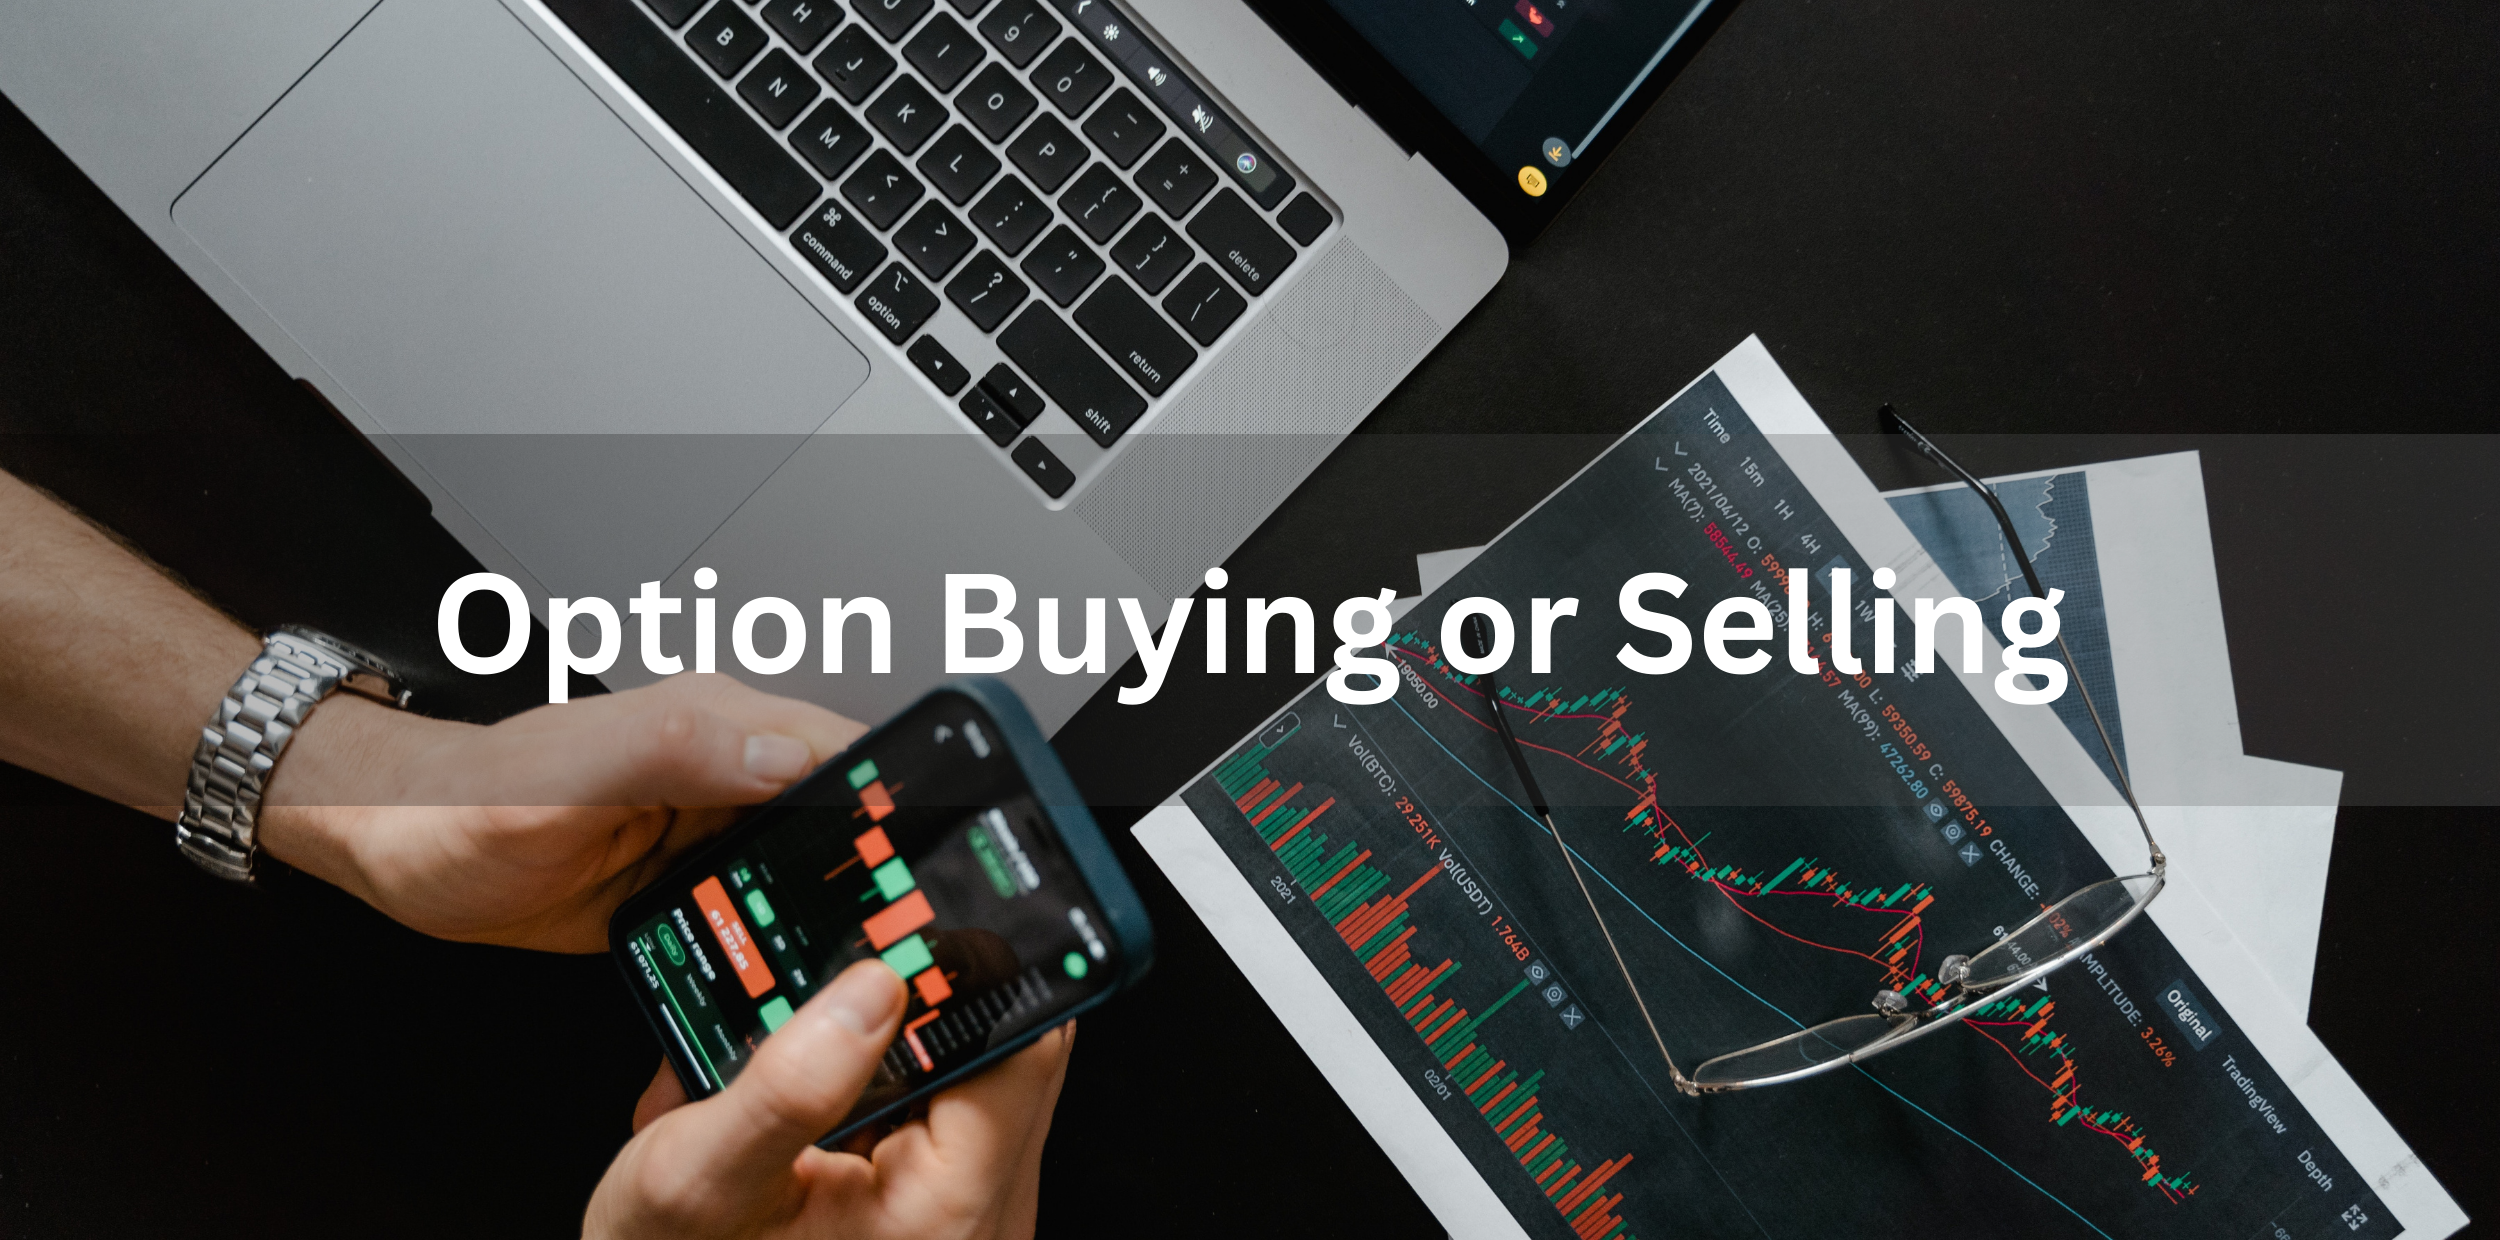 Option Buying or Selling: Which One is Better?￼